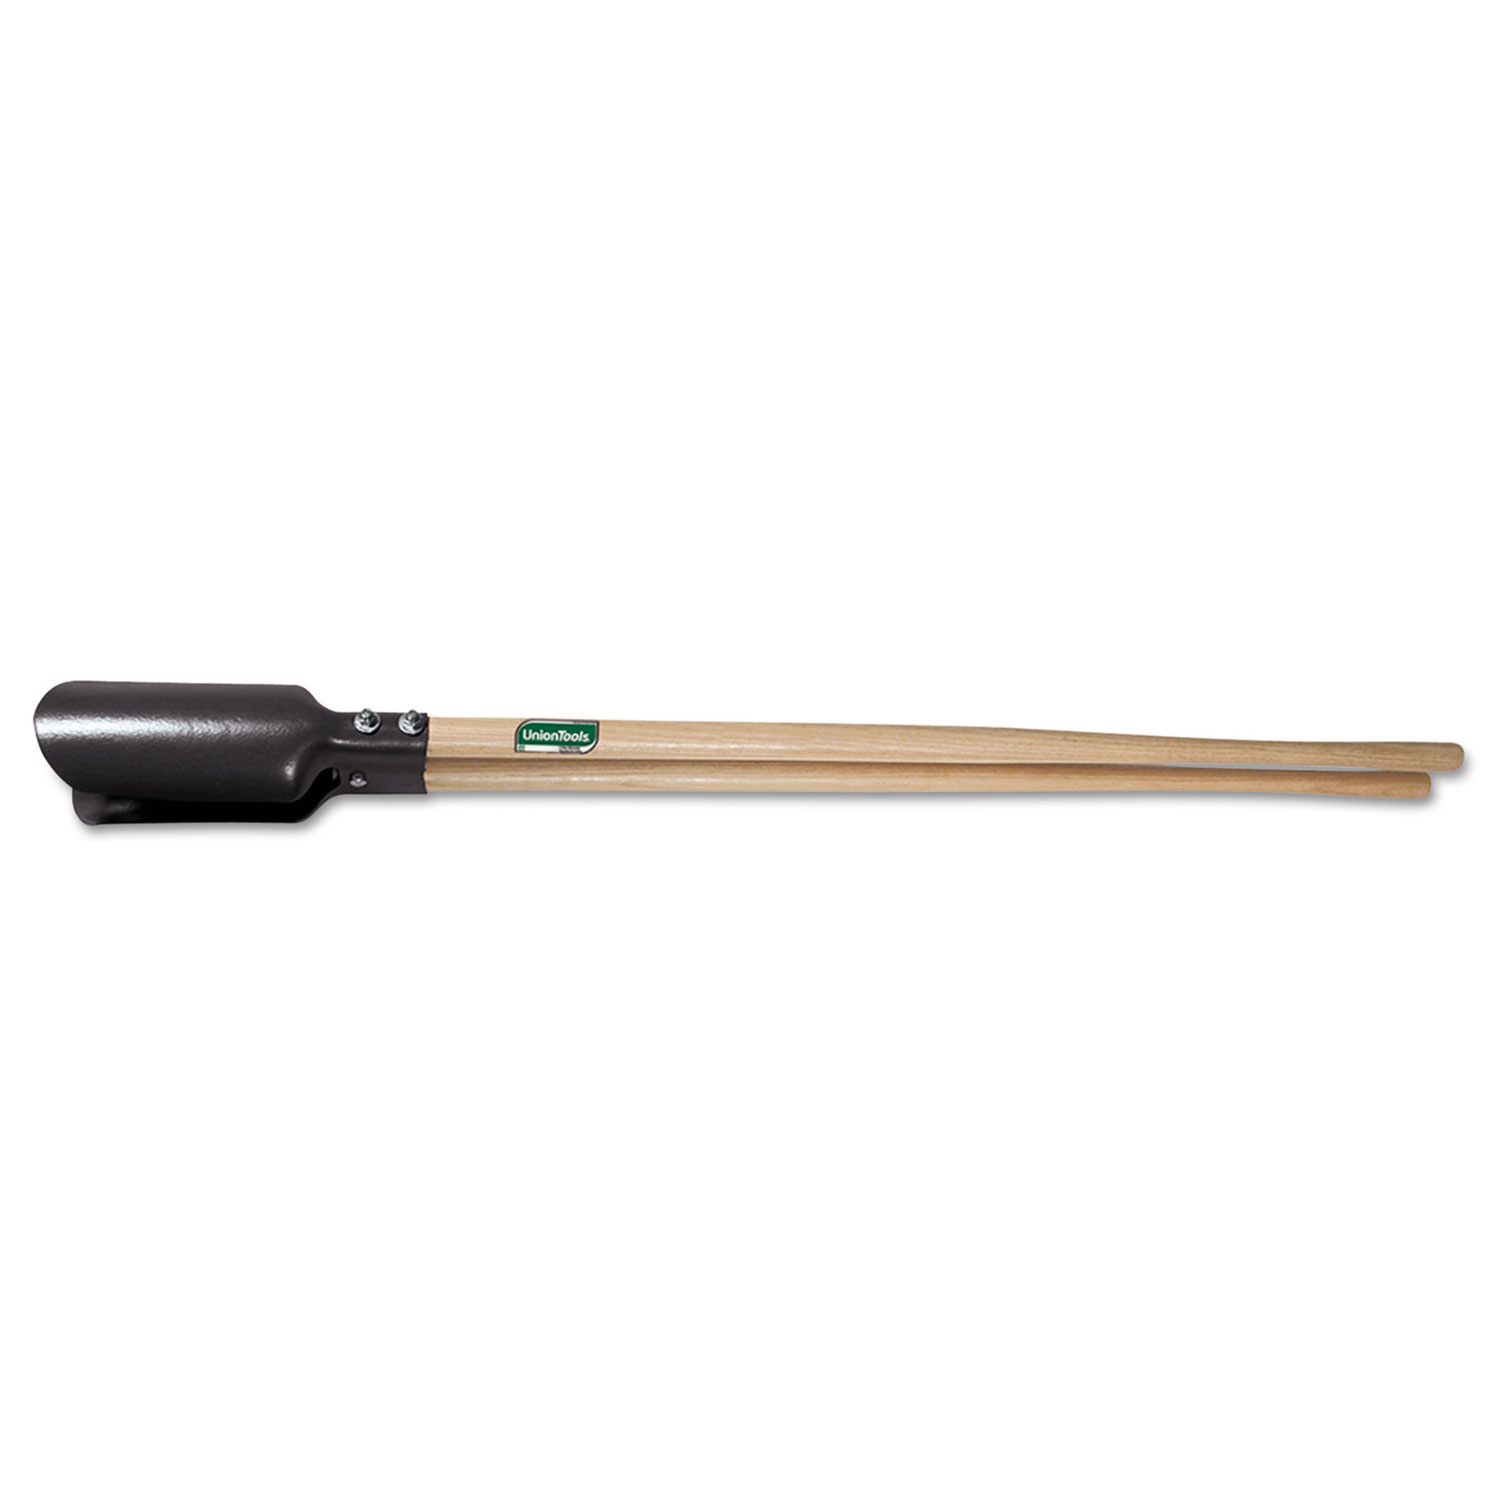 Post Hole Digger, 5 3/4 point spread, 48 Handle